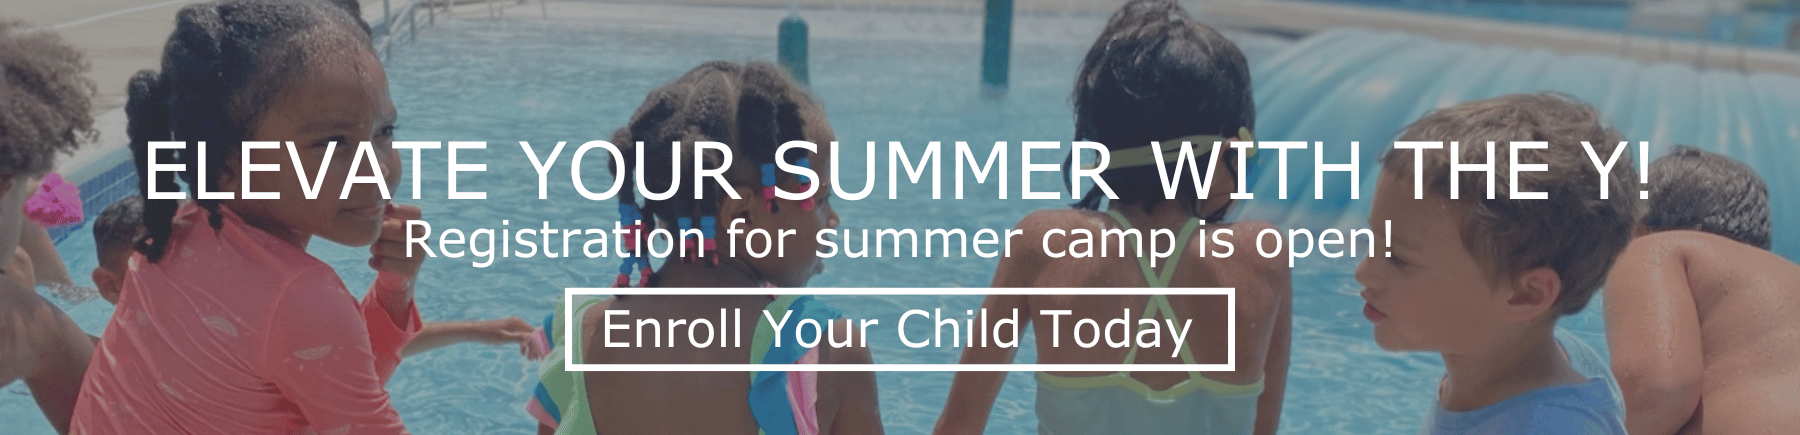 Banner saying "Elevate Your Summer with the Y! Registration for summer camp is open" and a button linking to registration saying "Enroll your Child Today"